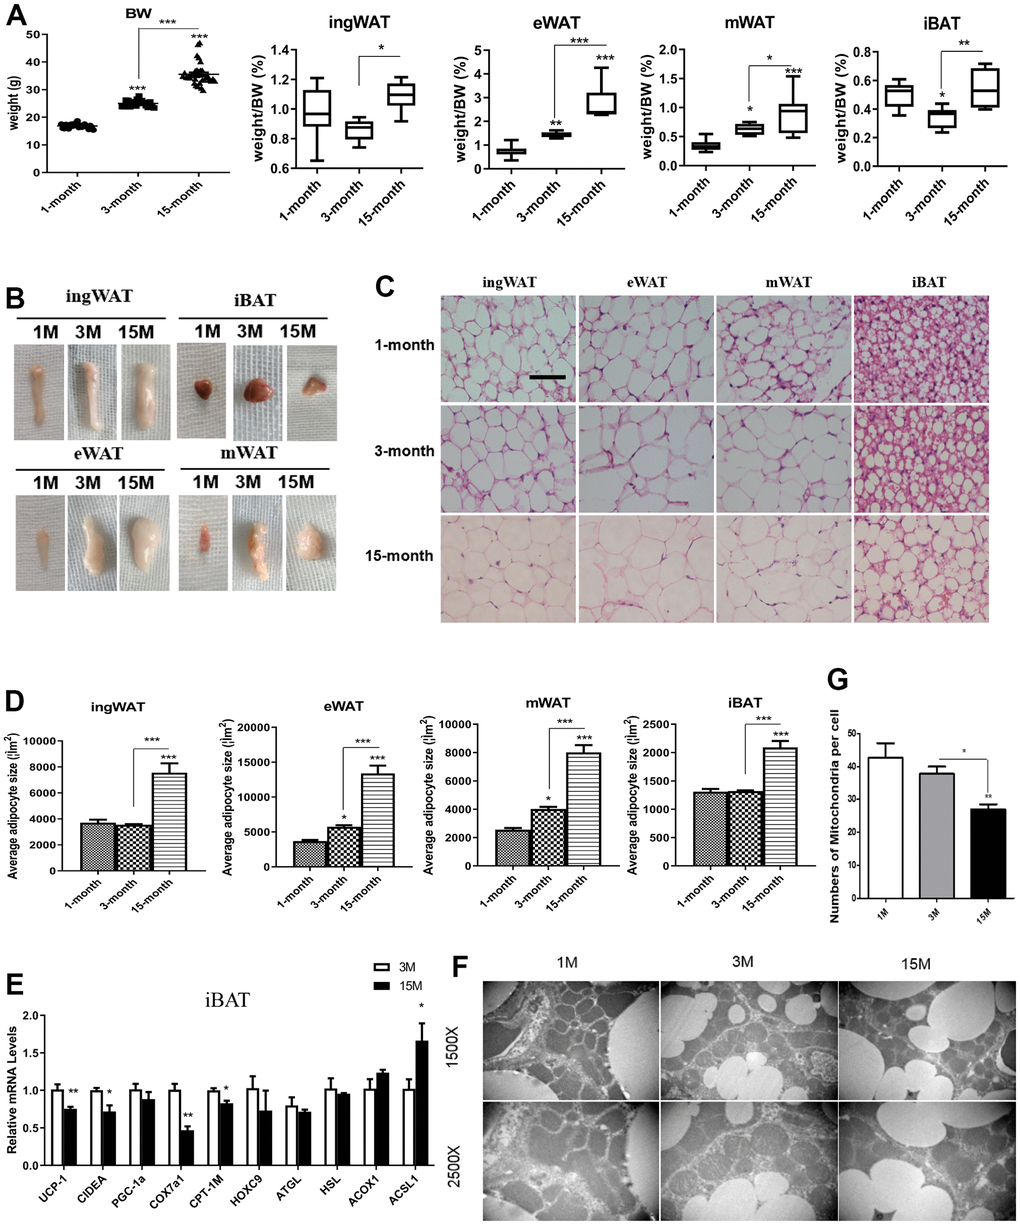 Differences in fat mass and fat distribution between young, adult and middle-age transitional mice. Young mice (1-month-old), adult mice (3-month-old) and middle-age transitional mice (15-month-old) were fed ad libitum. Body weight and body adipose tissues ratio of inguinal white adipose tissue (ingWAT), epididymal WAT (eWAT), mesenteric WAT (mWAT), interscapular BAT (iBAT) of mice (A) and their appearance (B) were analyzed (n = 6–12). The effect of aging on histological characteristics of white and brown adipose tissues (C). The average area of adipocytes (μm2) in every 100-mm2 area range of various adipose tissues was quantified using the Image Pro Plus software (D) (n = 6-8). Scale bar represents 100 μm. Differential expression of mitochondrial biogenesis related gene (Pgc-1α) and thermogenic gene (Ucp-1) (E) were measured (n = 6). Representative transmission electron microscopy (TEM) images of brown adipose tissues from the three groups of mice fed ad libitum and mitochondrial numbers (F, G) were analyzed. All data are presented as the mean ± SEM. * p p p 